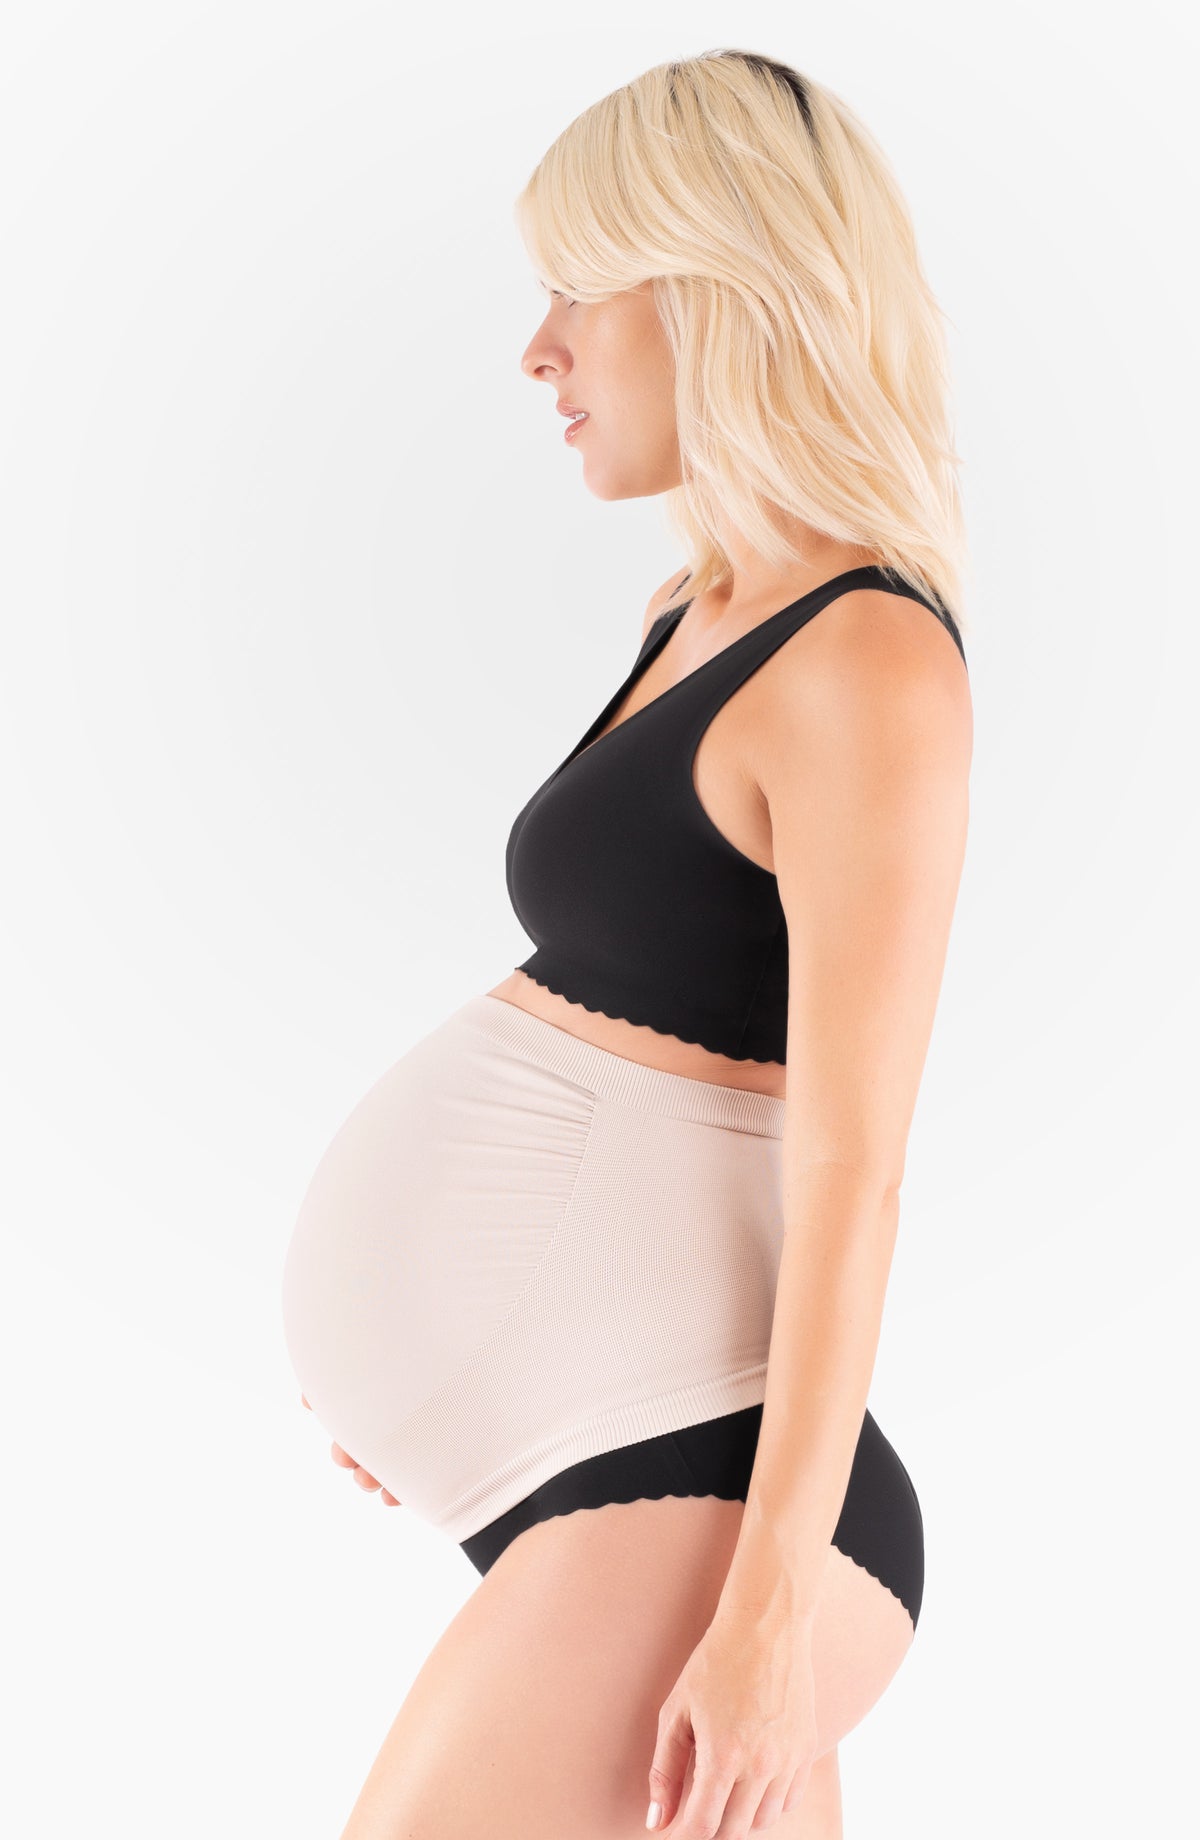 Belly Bandit Review: Postpartum Belly Wrap Support Review 2023